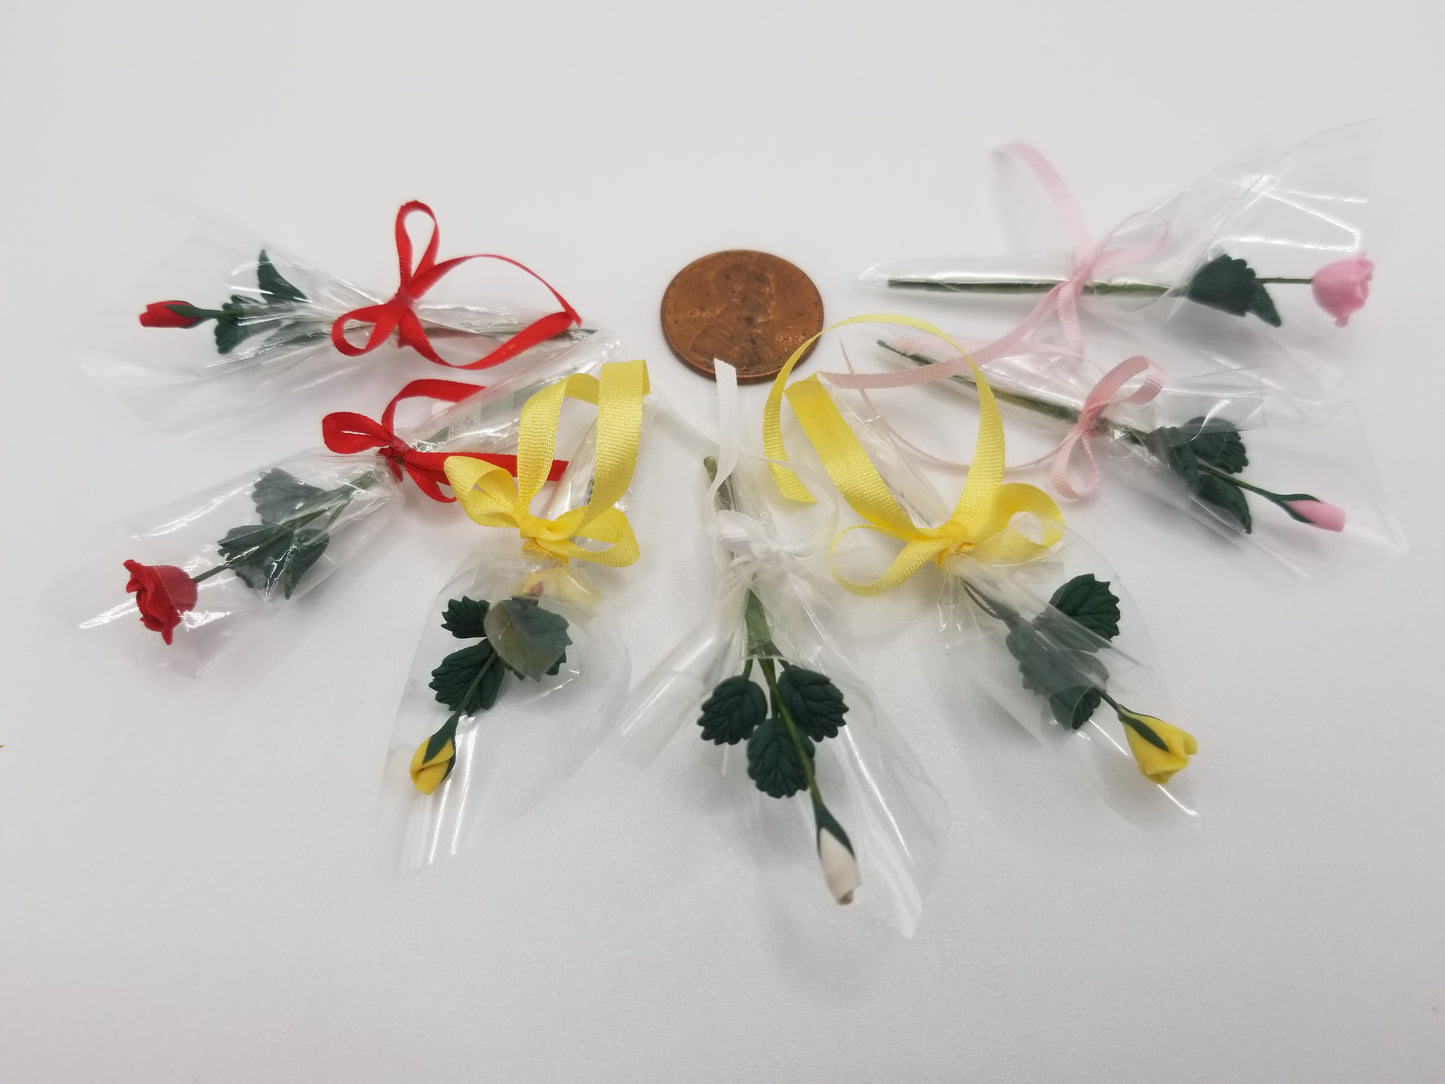 miniature dollhouse single rose bud bouquet wrapped in cellophane with matching bow closed bud or open rose option. one inch scale 1:!2